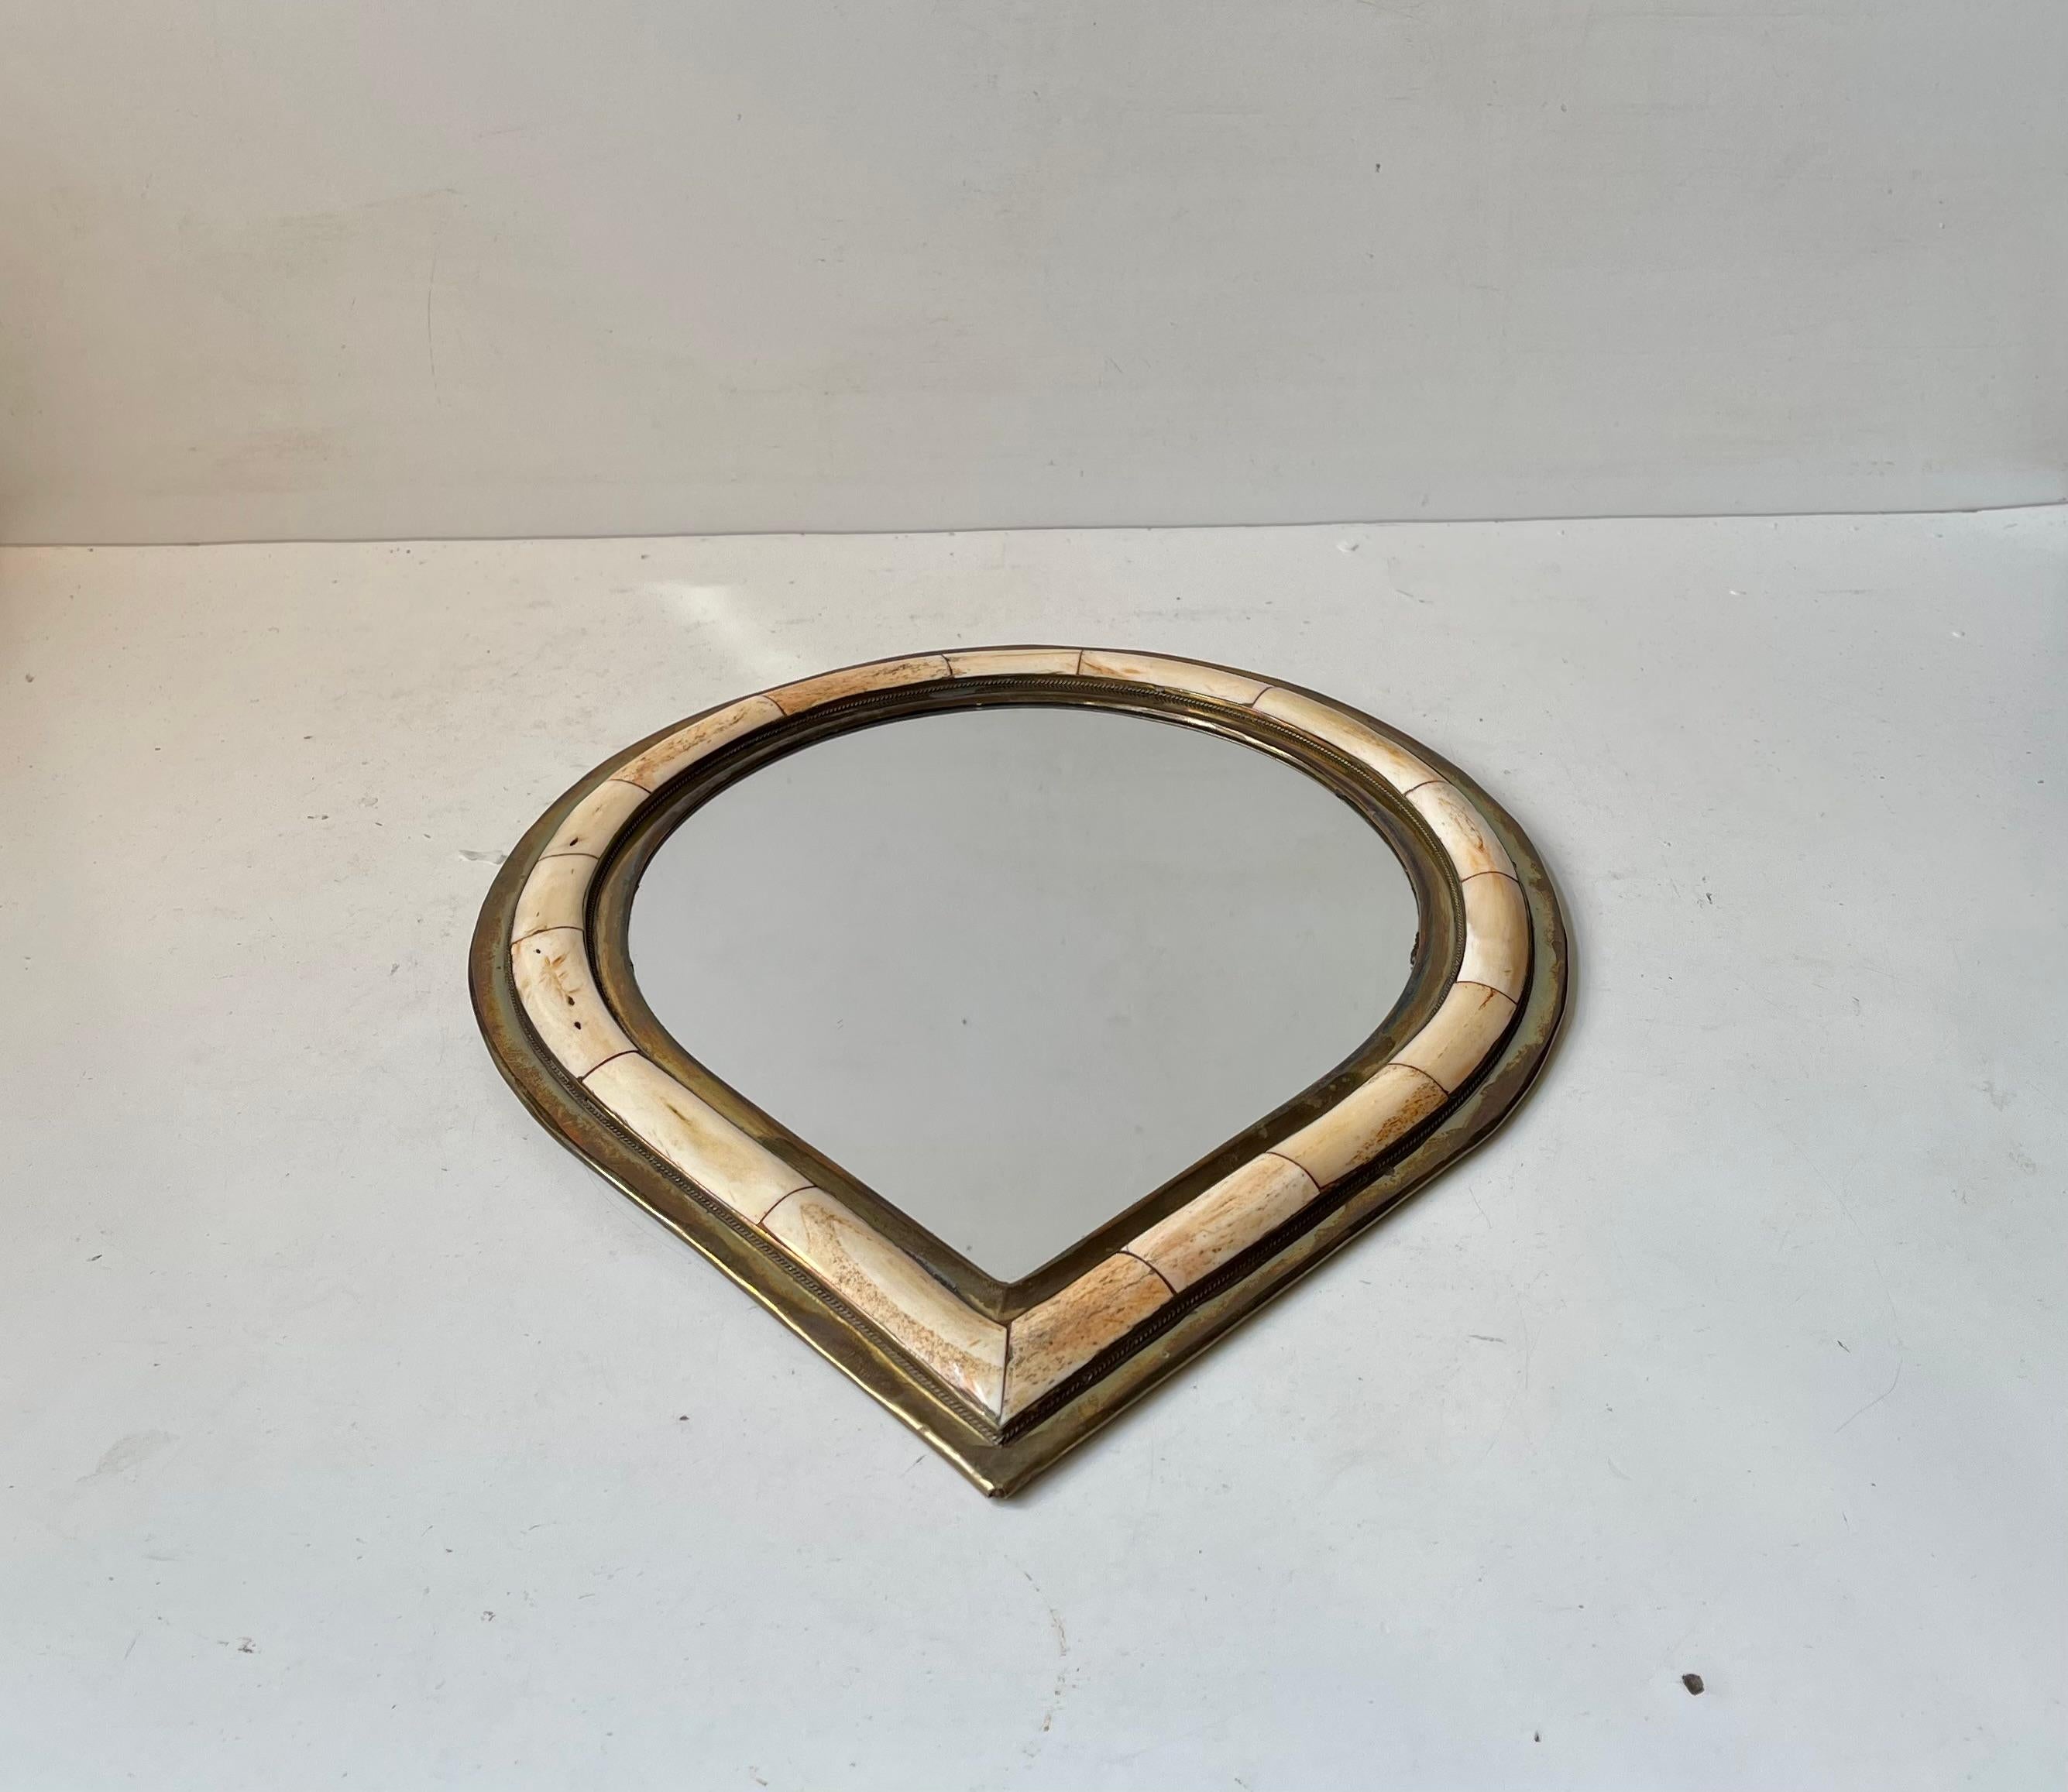 Artisan hand-made small wall- or vanity mirror executed in brass and set with rectangles of cut, rounded and polished camel bone. Made in Morocco where it was brought home by a Danish tourist during the 1970s or 80s. Suitable for spicy moroccan